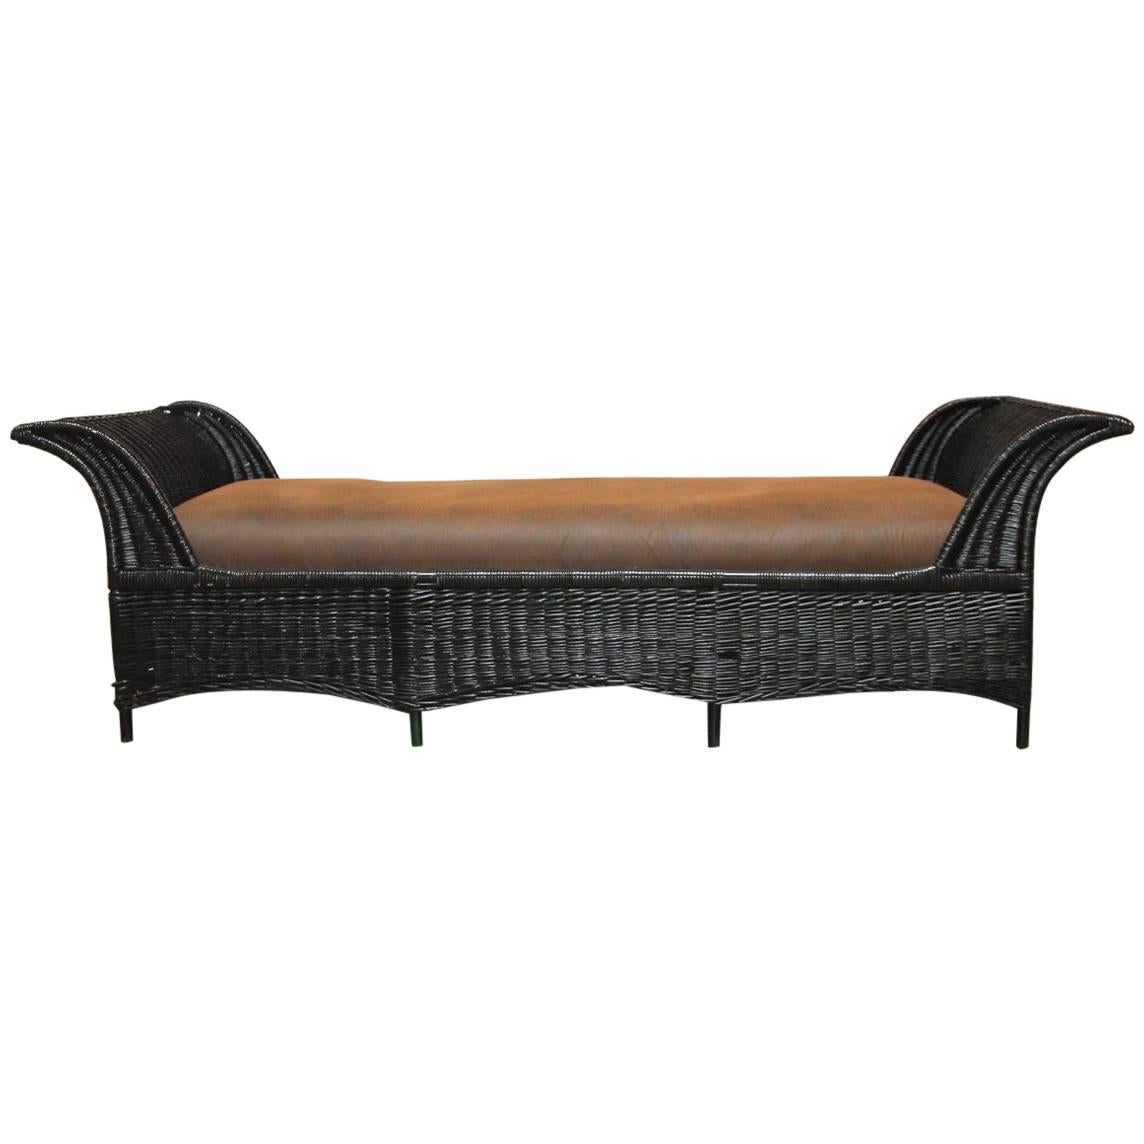 Black Lacquered Wicker Daybed